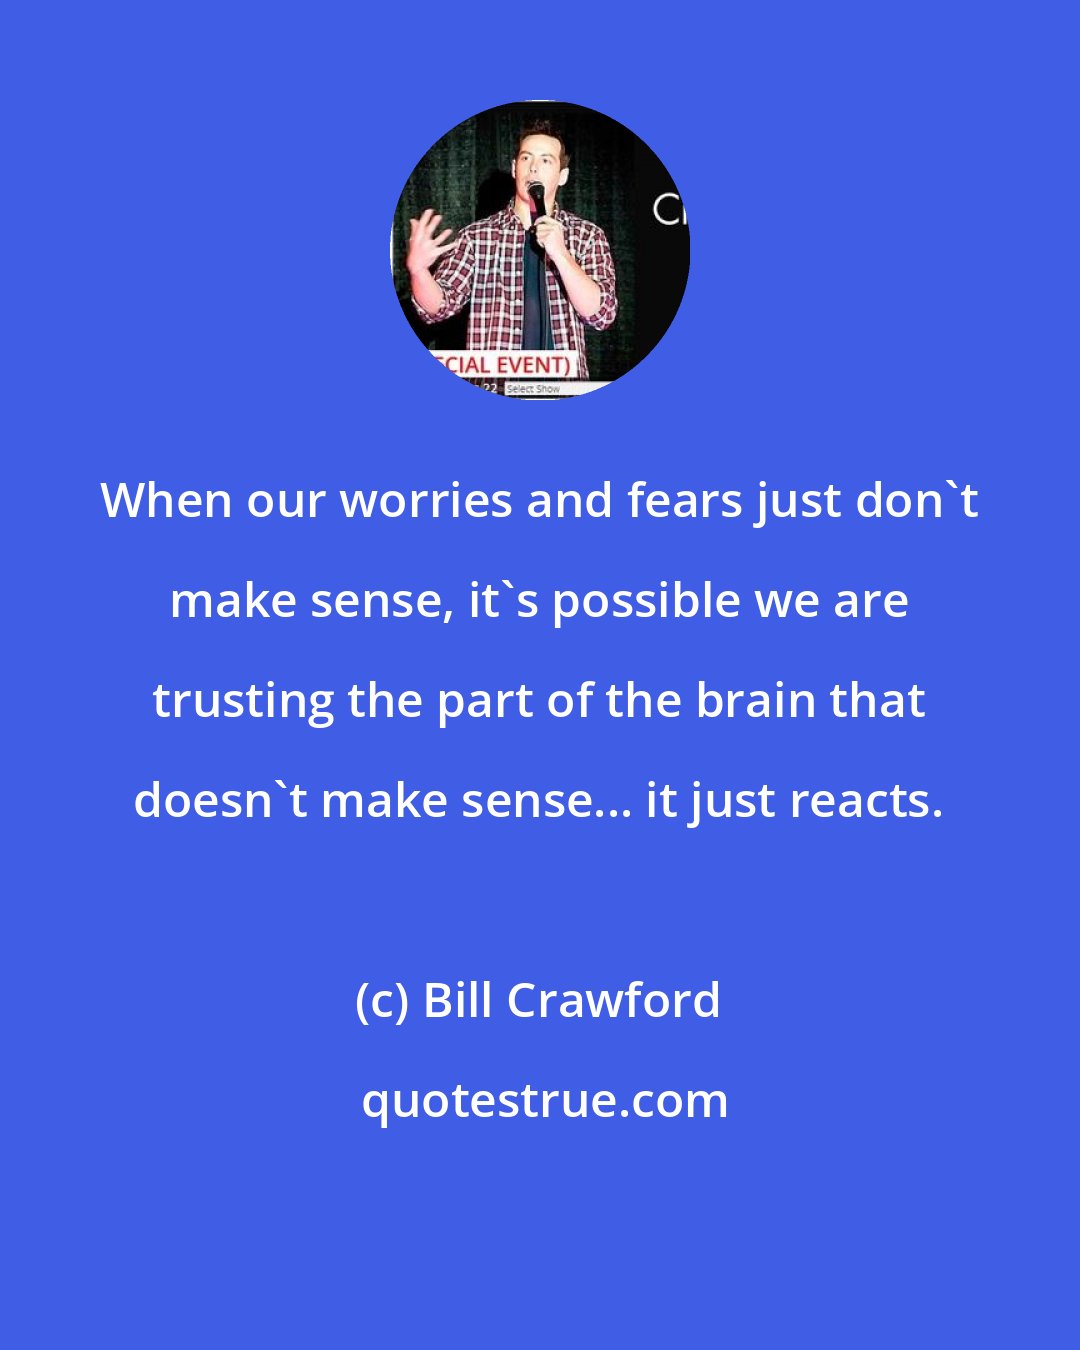 Bill Crawford: When our worries and fears just don't make sense, it's possible we are trusting the part of the brain that doesn't make sense... it just reacts.